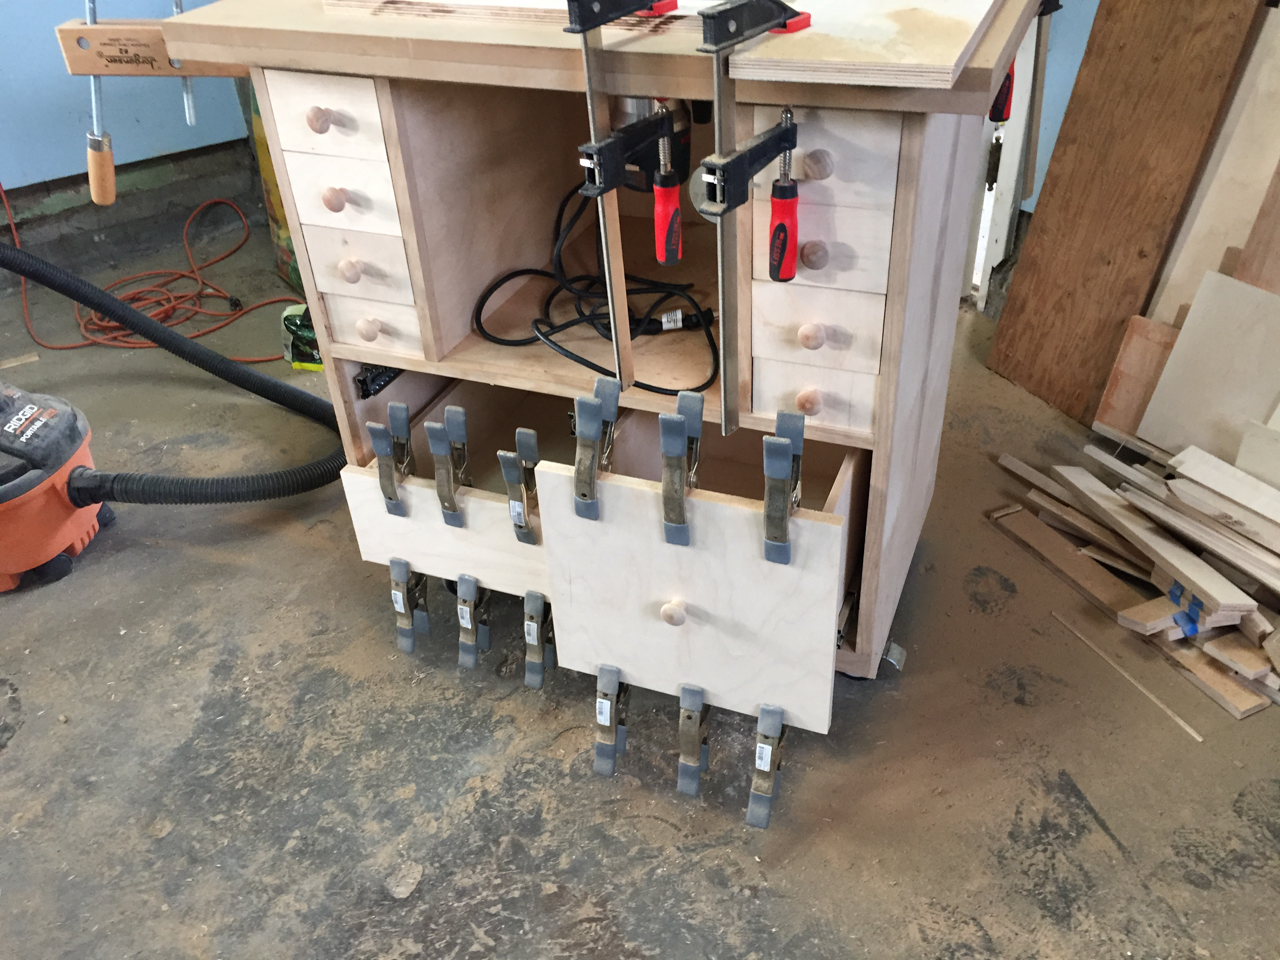 Router Table Build - Bottom Drawer Faces